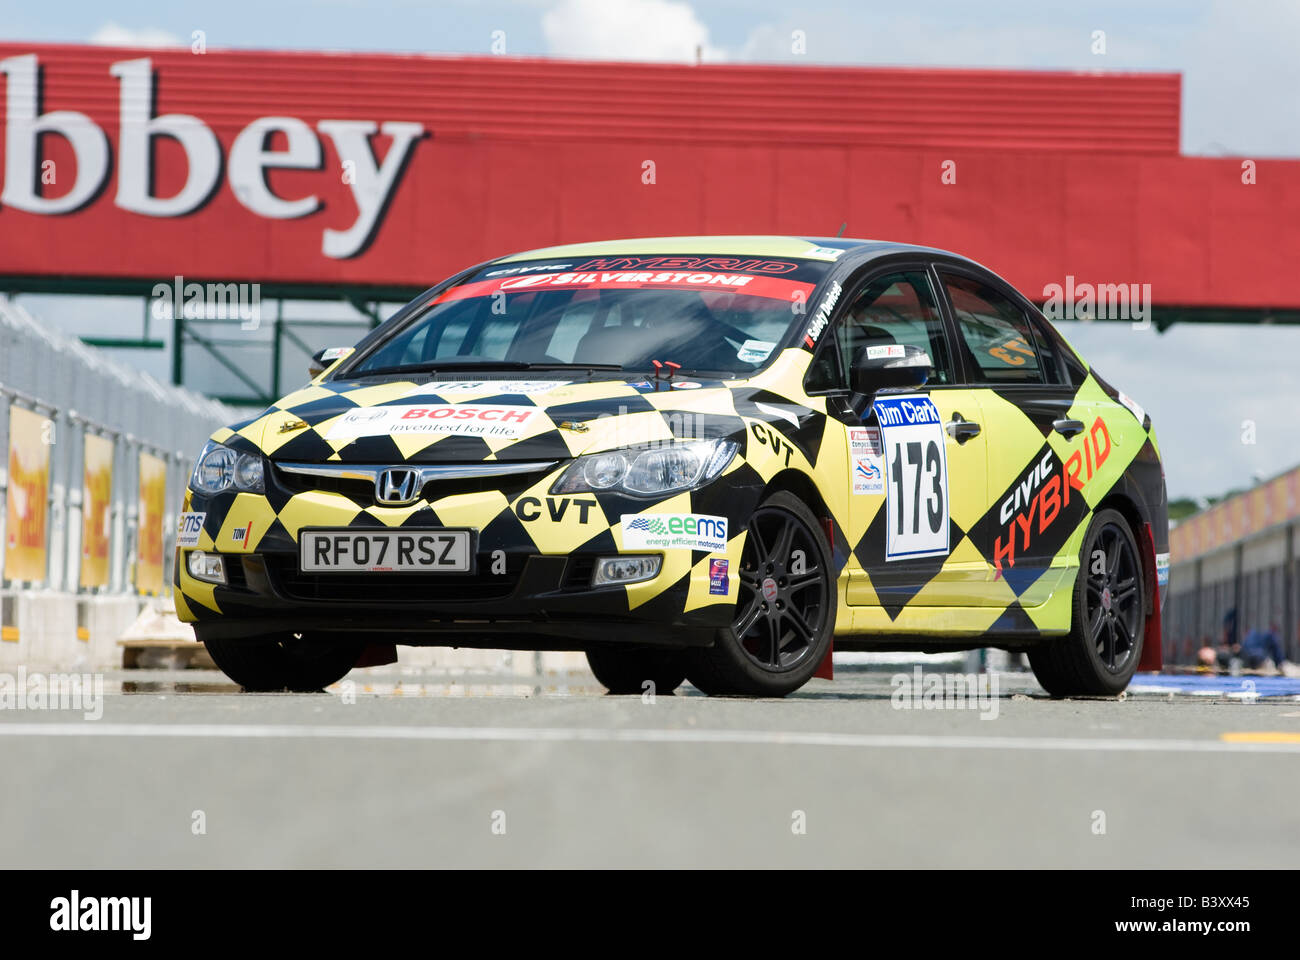 Oaktec Honda Insight hybrid rally car The car has been competed using E85 Bio ethanol fuel Stock Photo